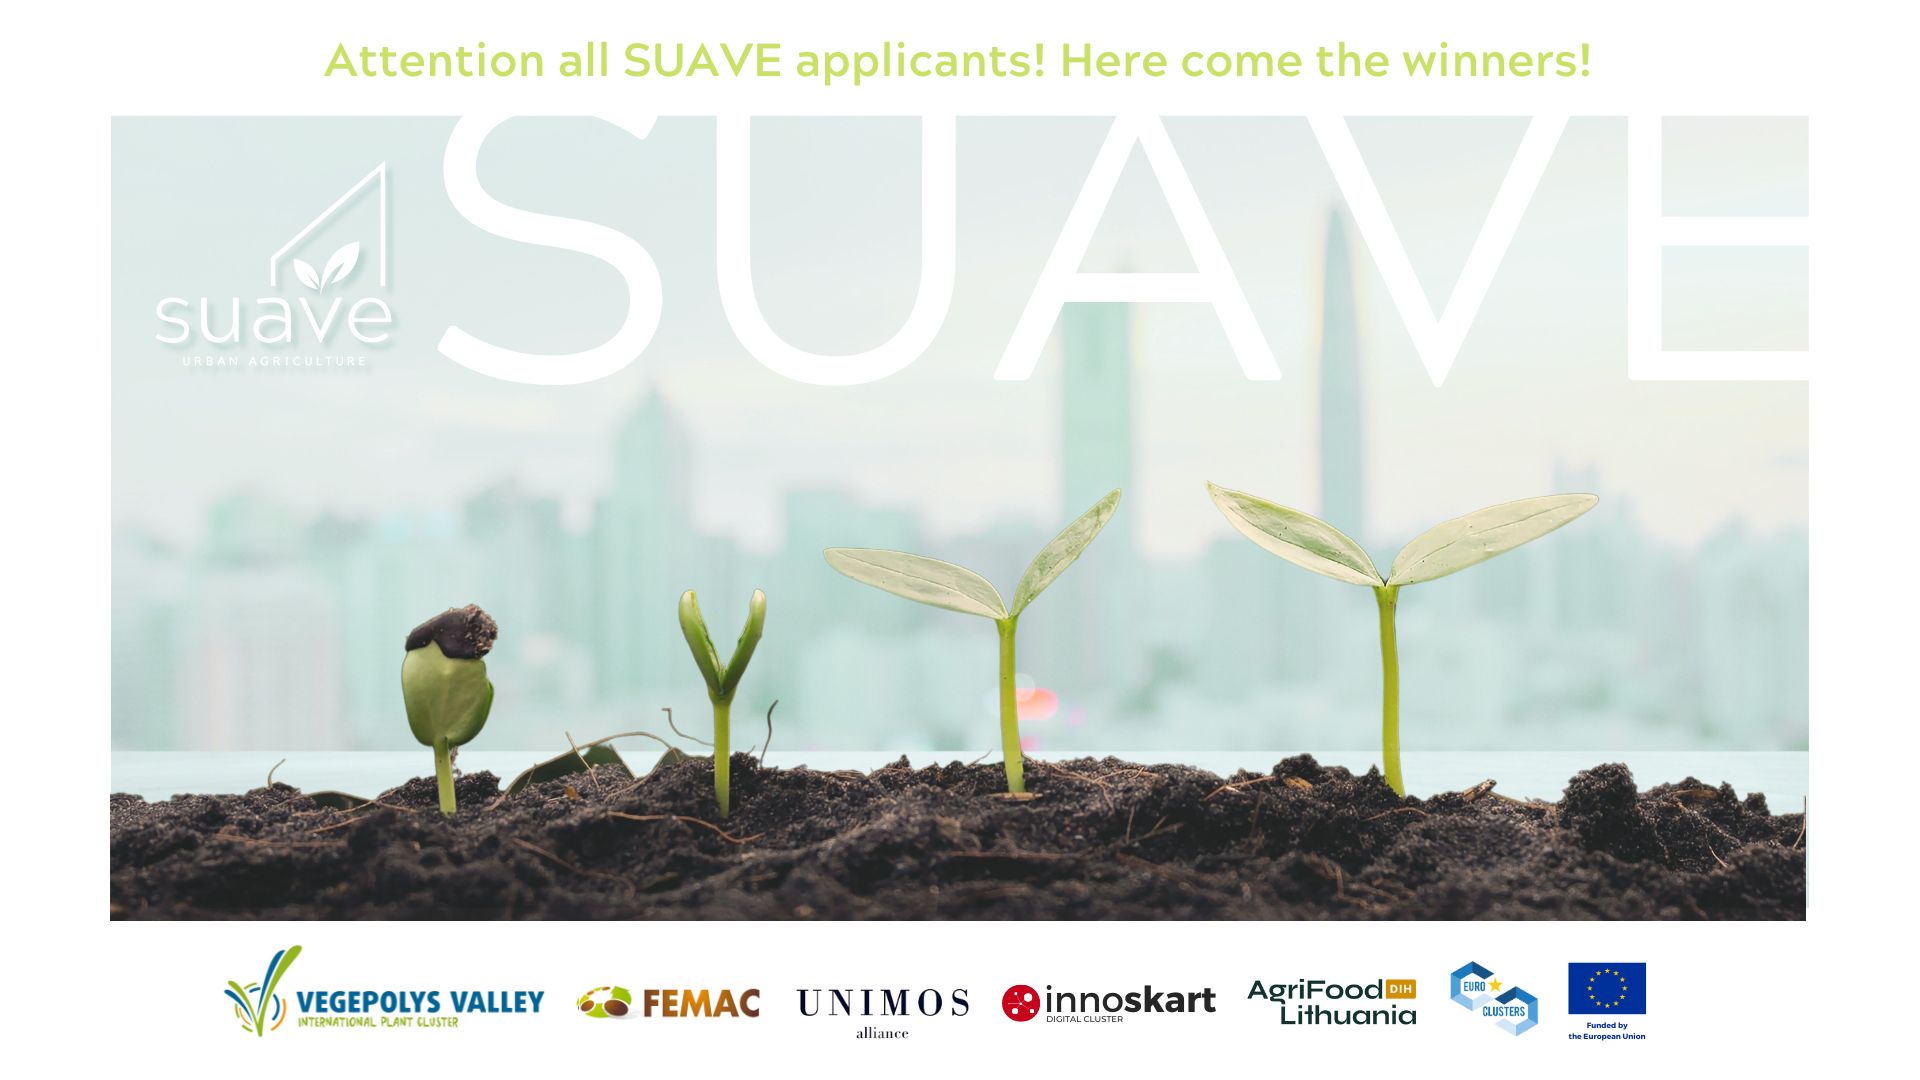 SUAVE APPLICATIONS RESULTS.